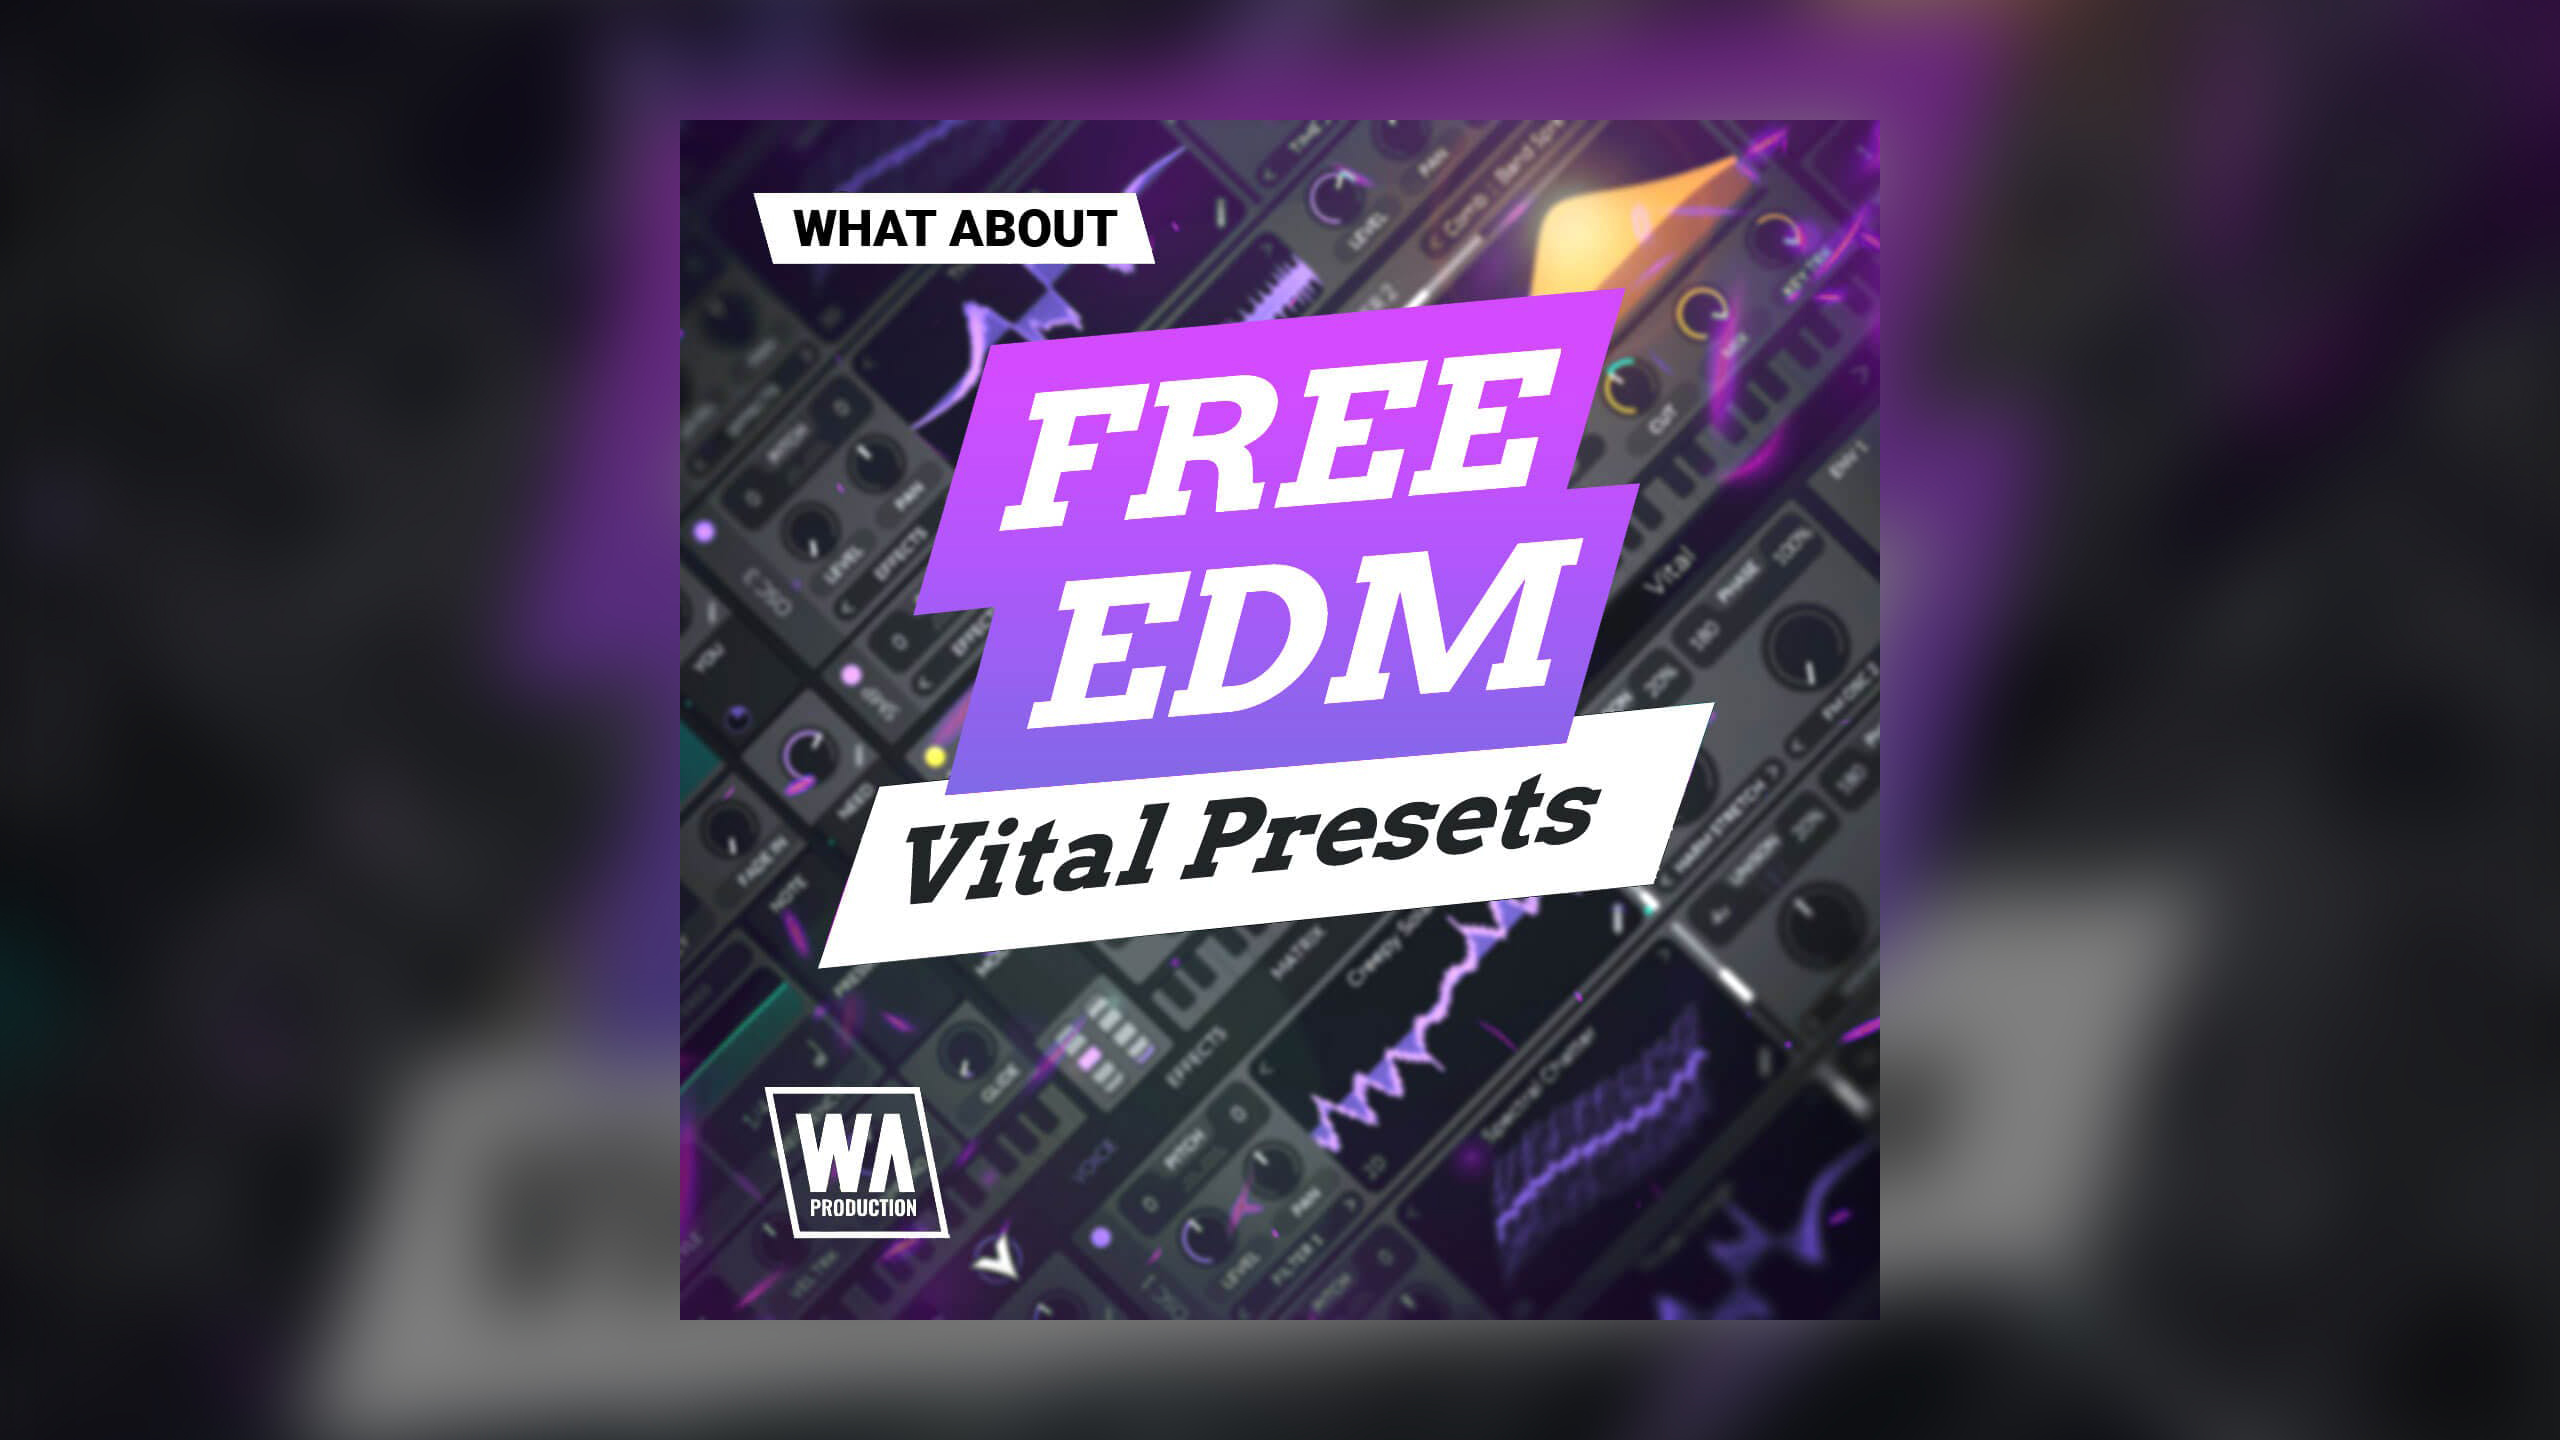 Pick up 50 free EDM presets for Vital synth – including synths, basses, leads, drums and FX